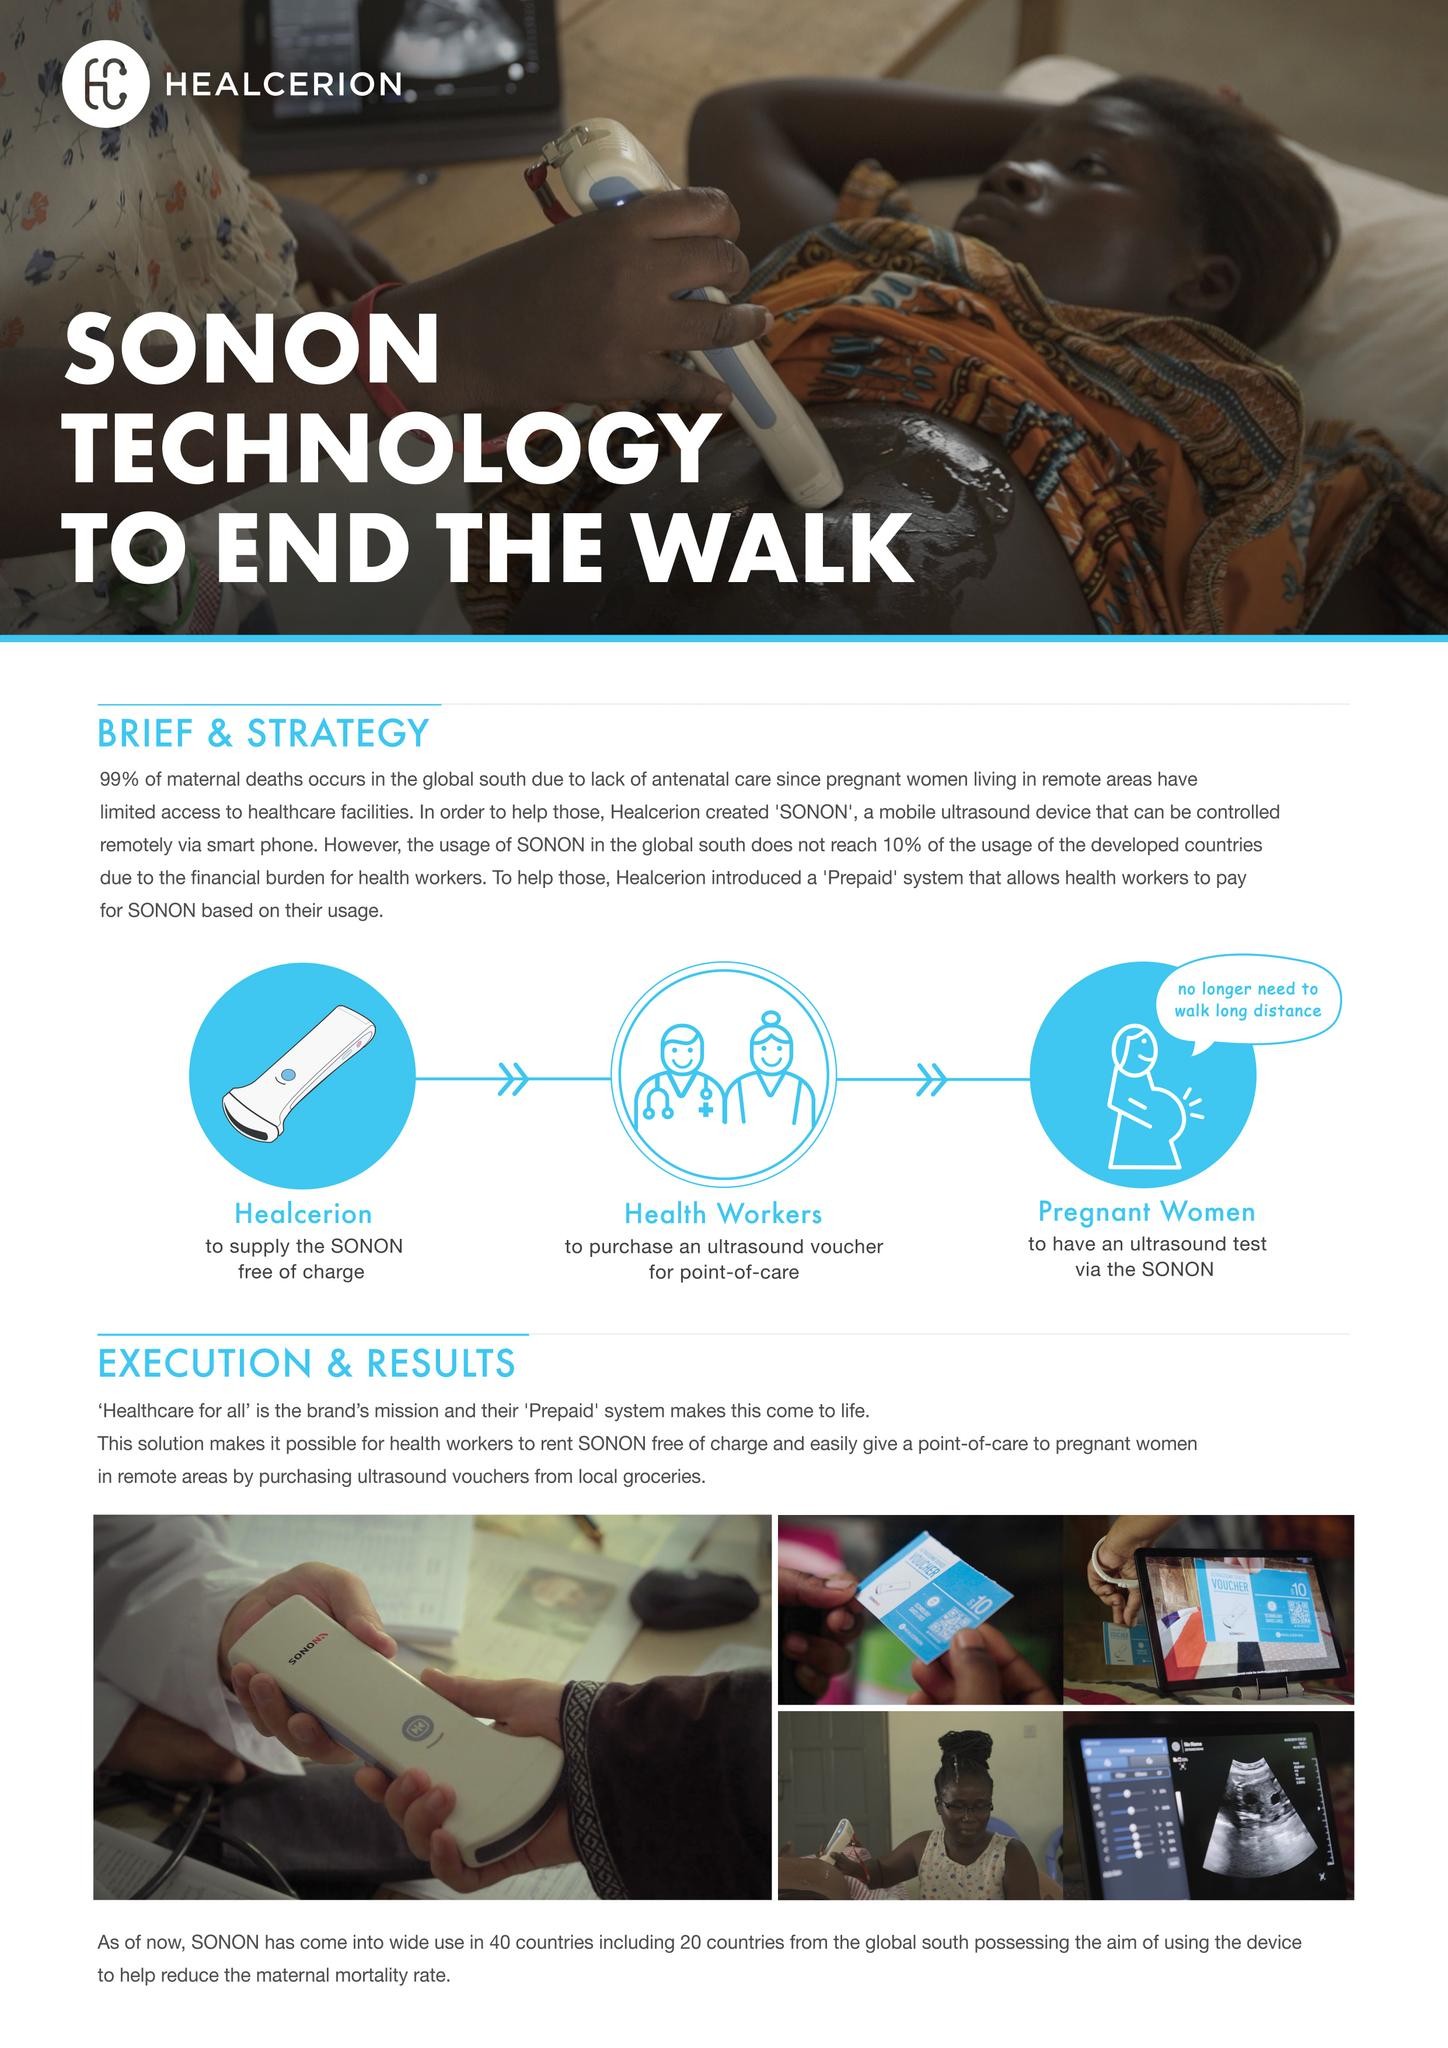 SONON, TECHNOLOGY TO END THE WALK